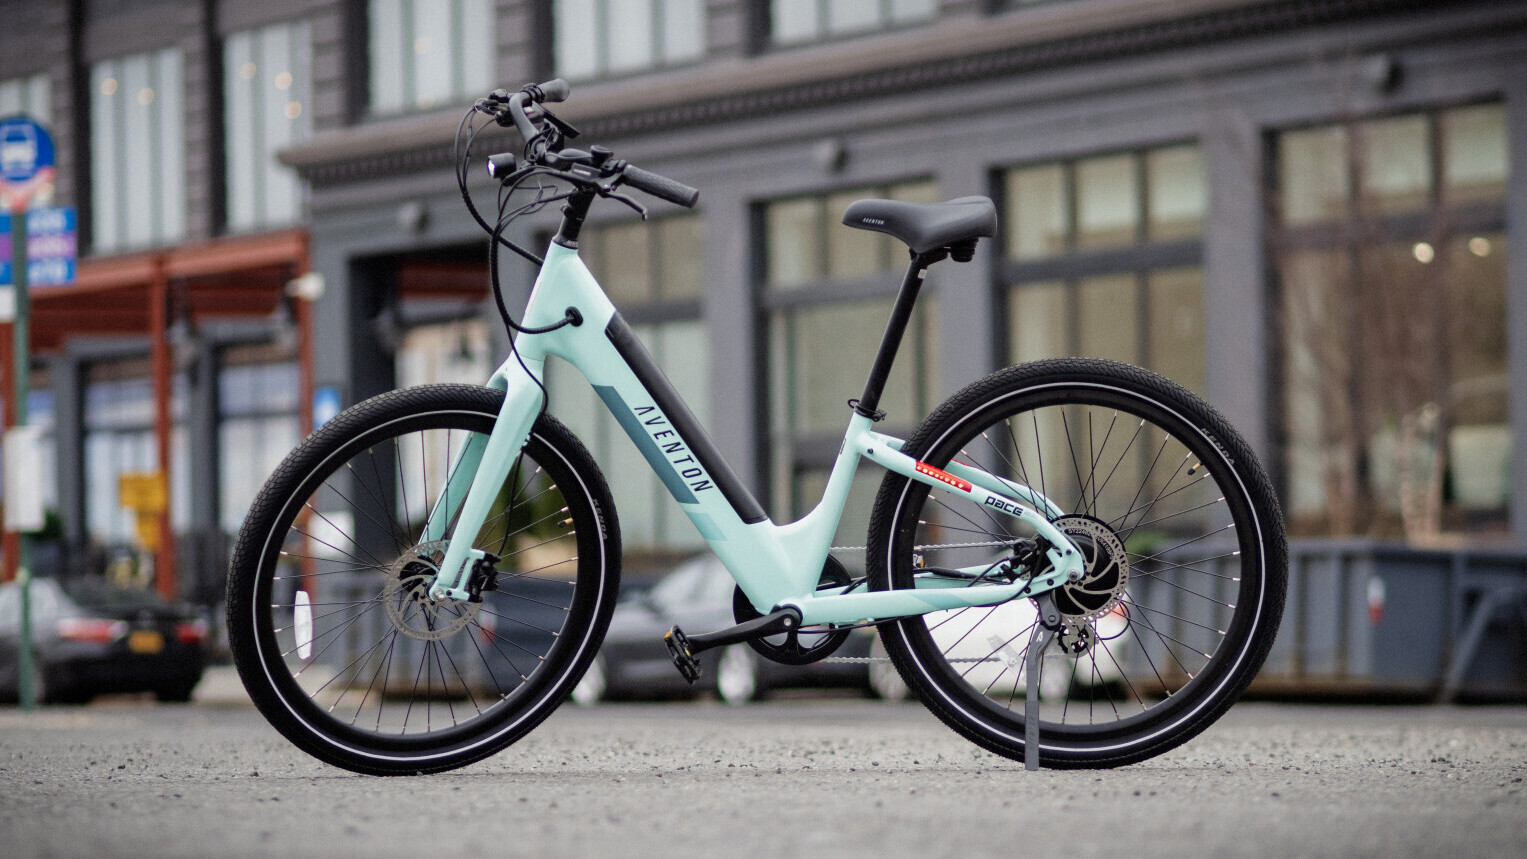 Hands-on: Aventon’s new Pace ebikes are sleek rides that won’t break the bank